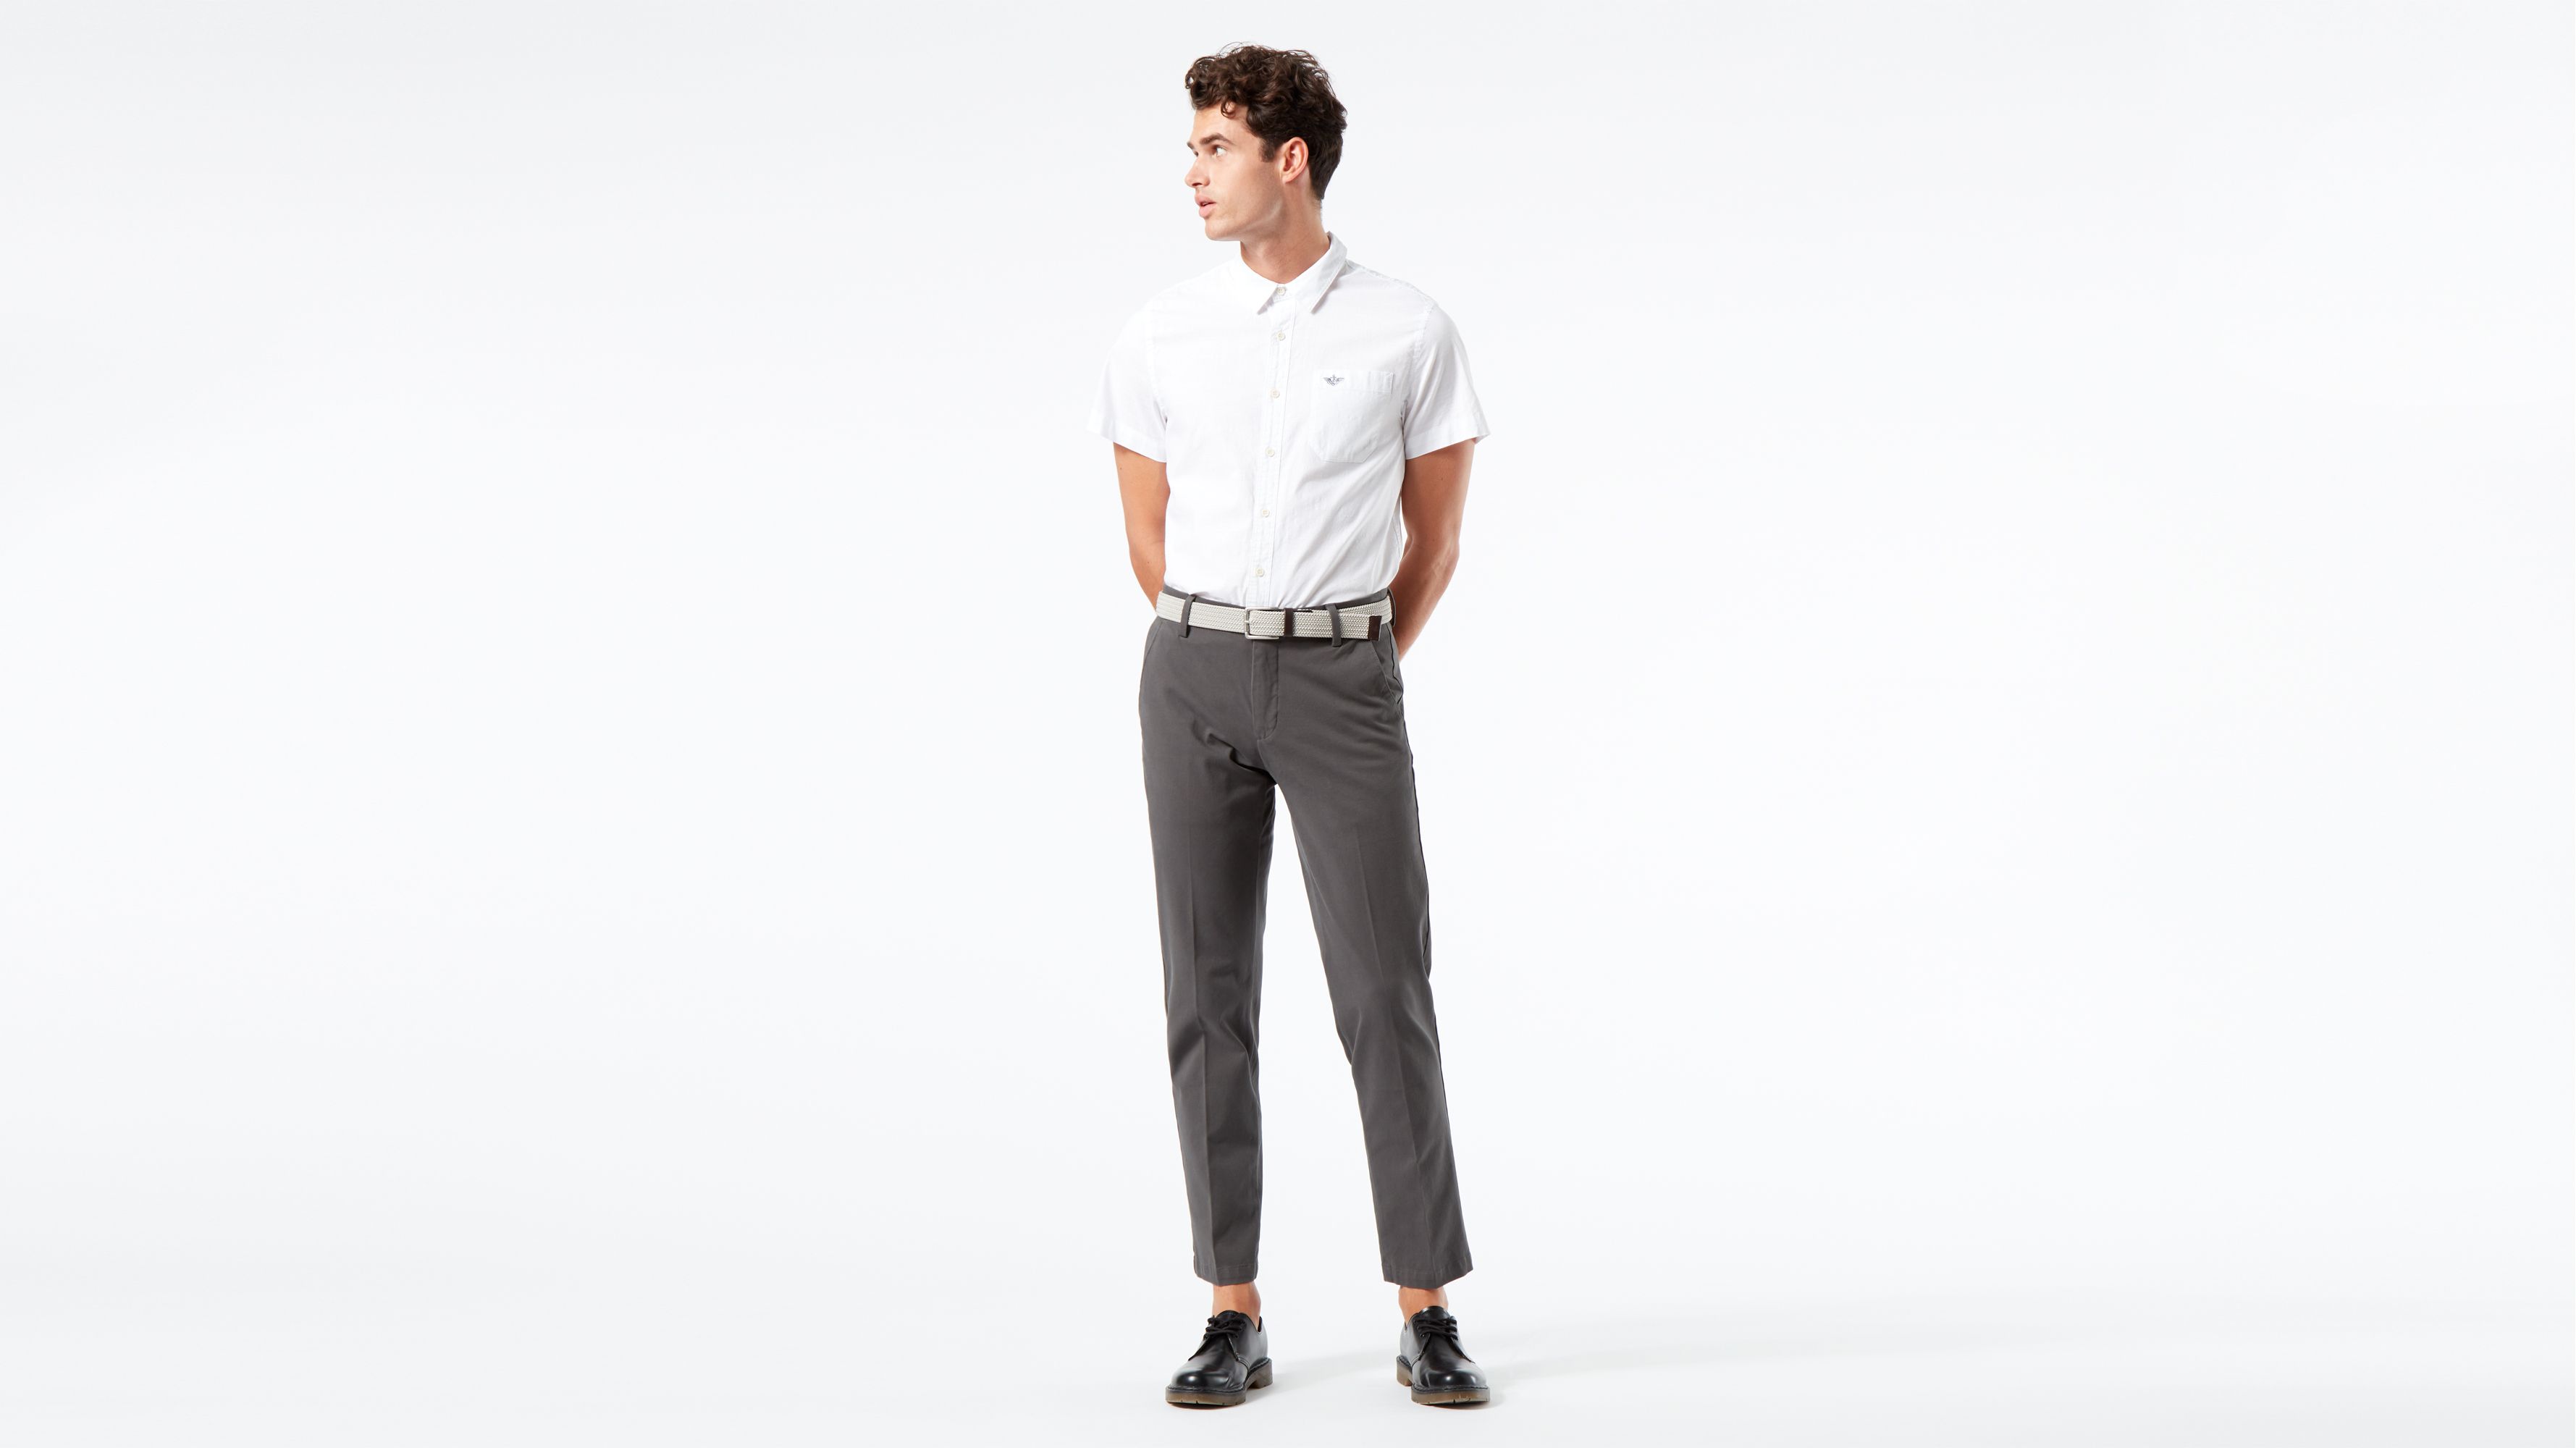 dockers workday khaki slim tapered fit